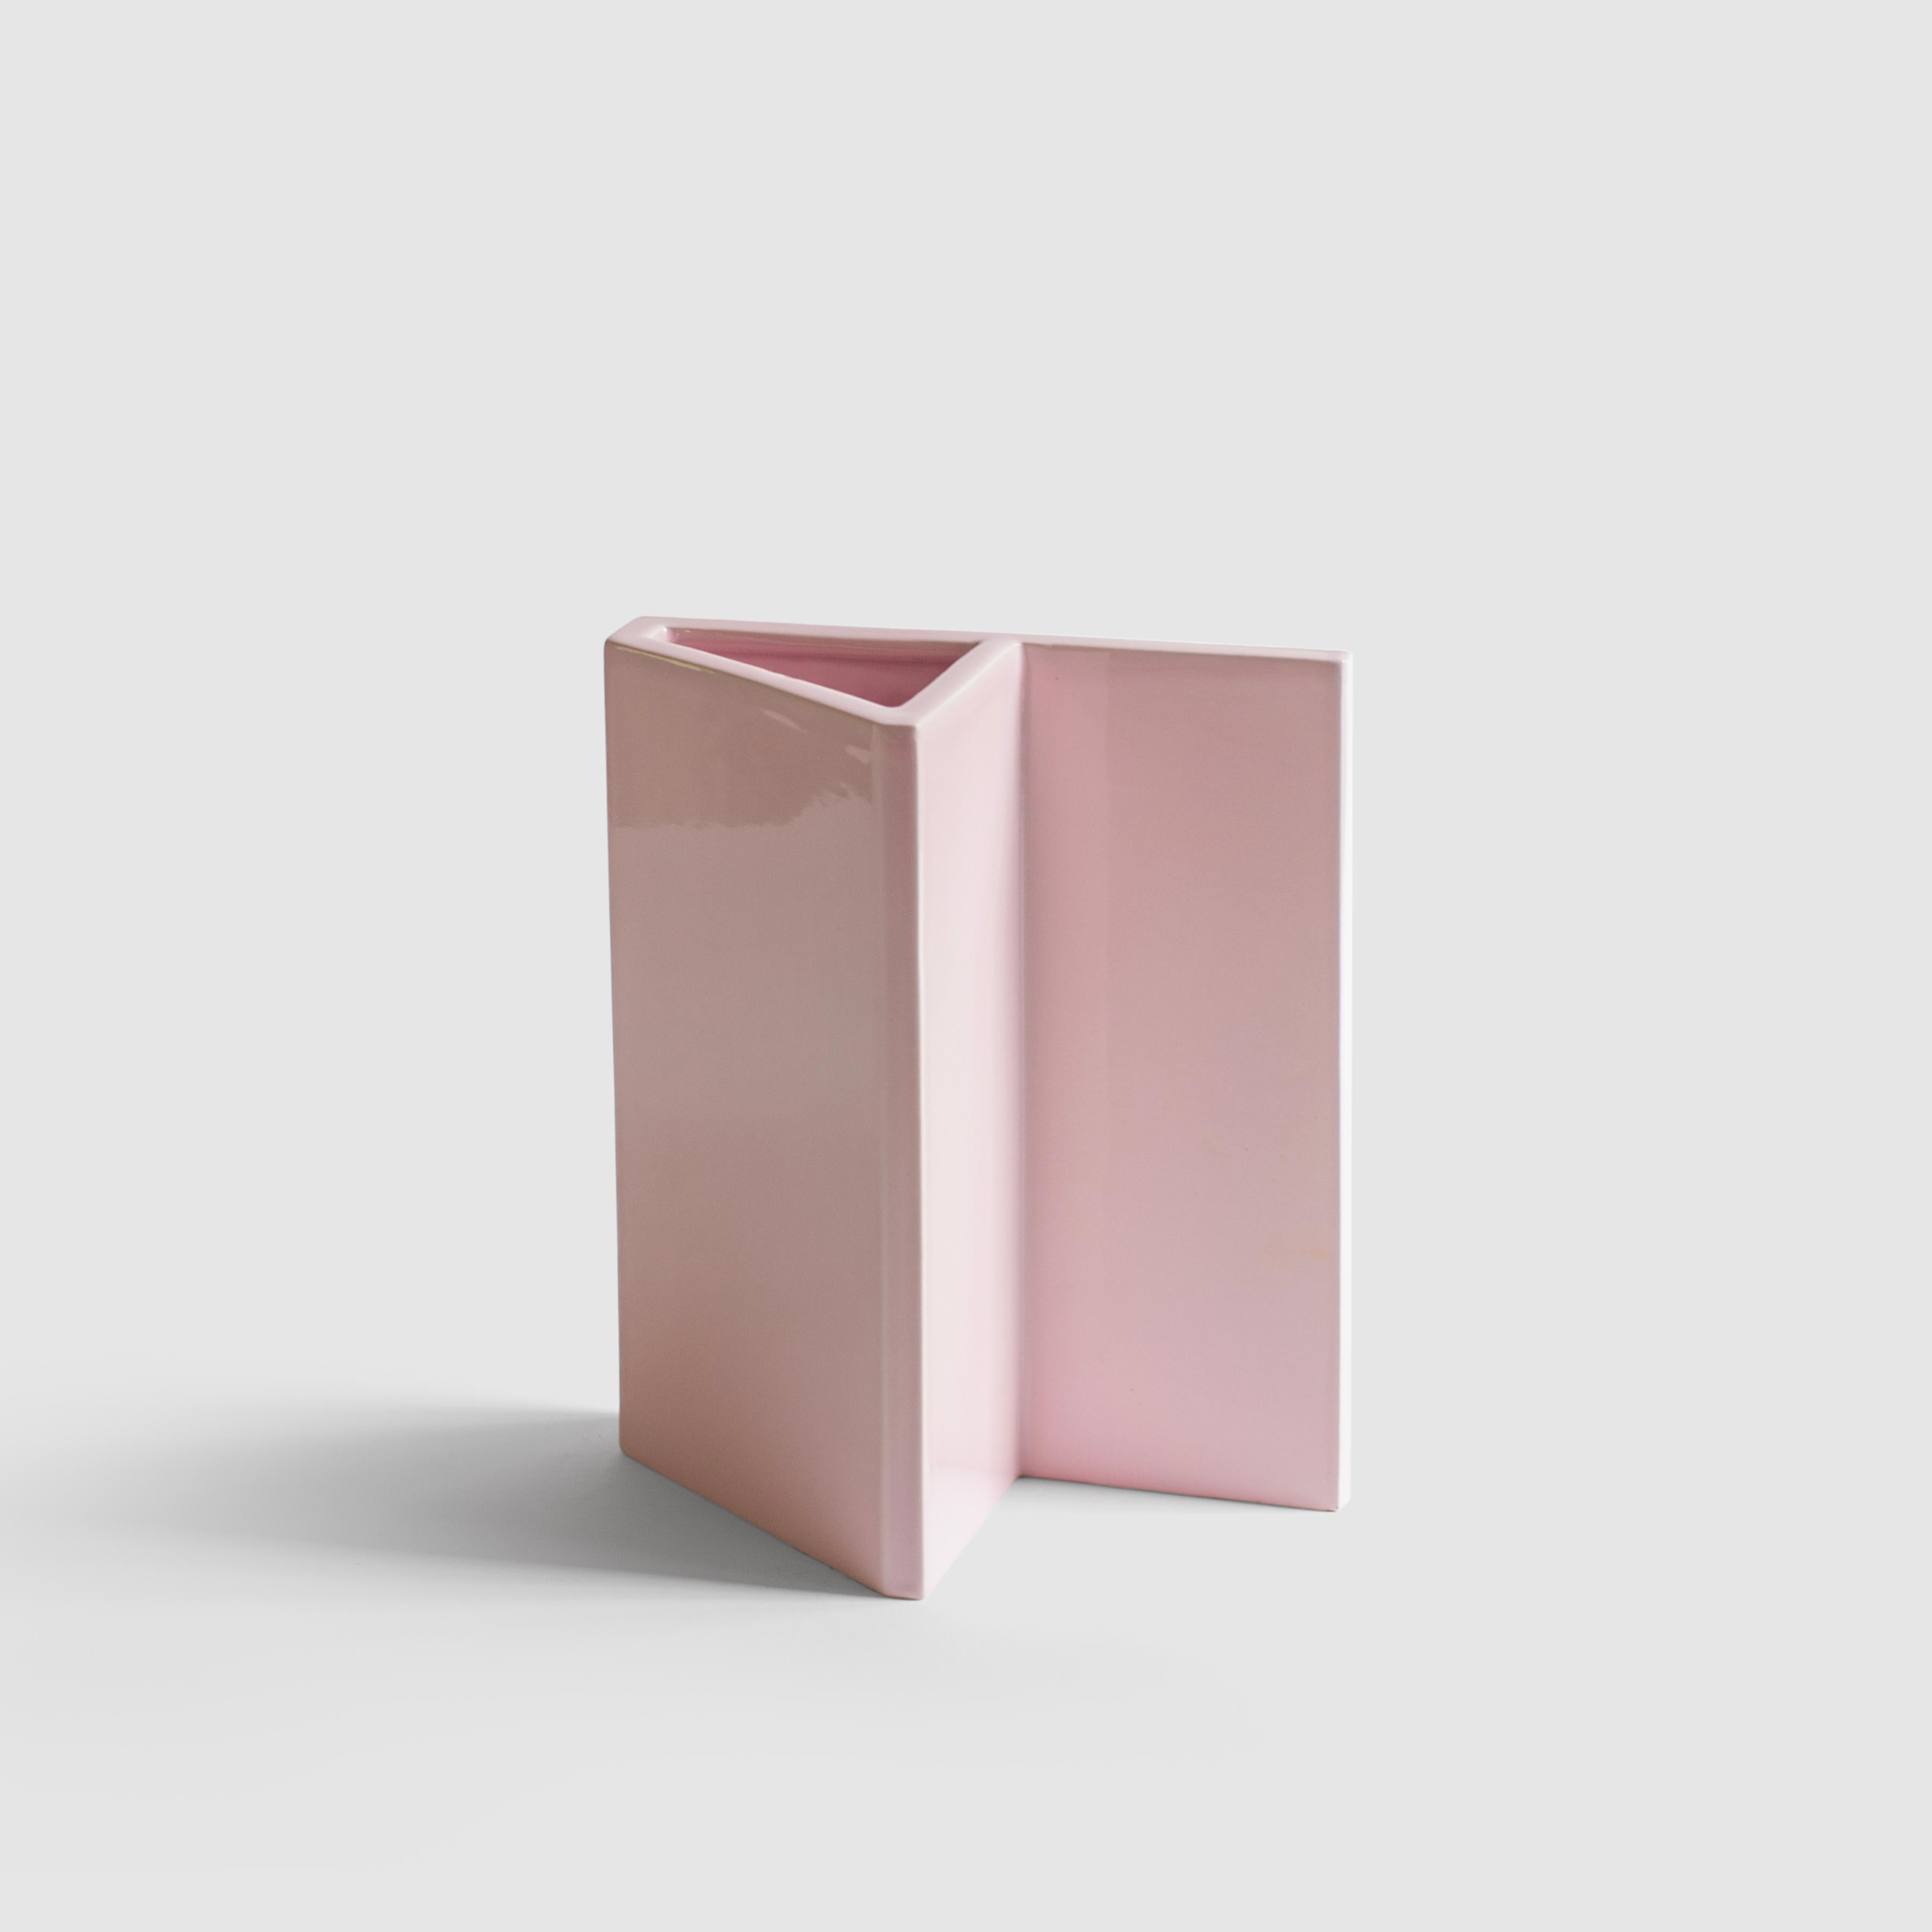 A minimalist and playful vase in slip-cast ceramic with a pink glaze, the piece is handmade in Milan.
Part of the 